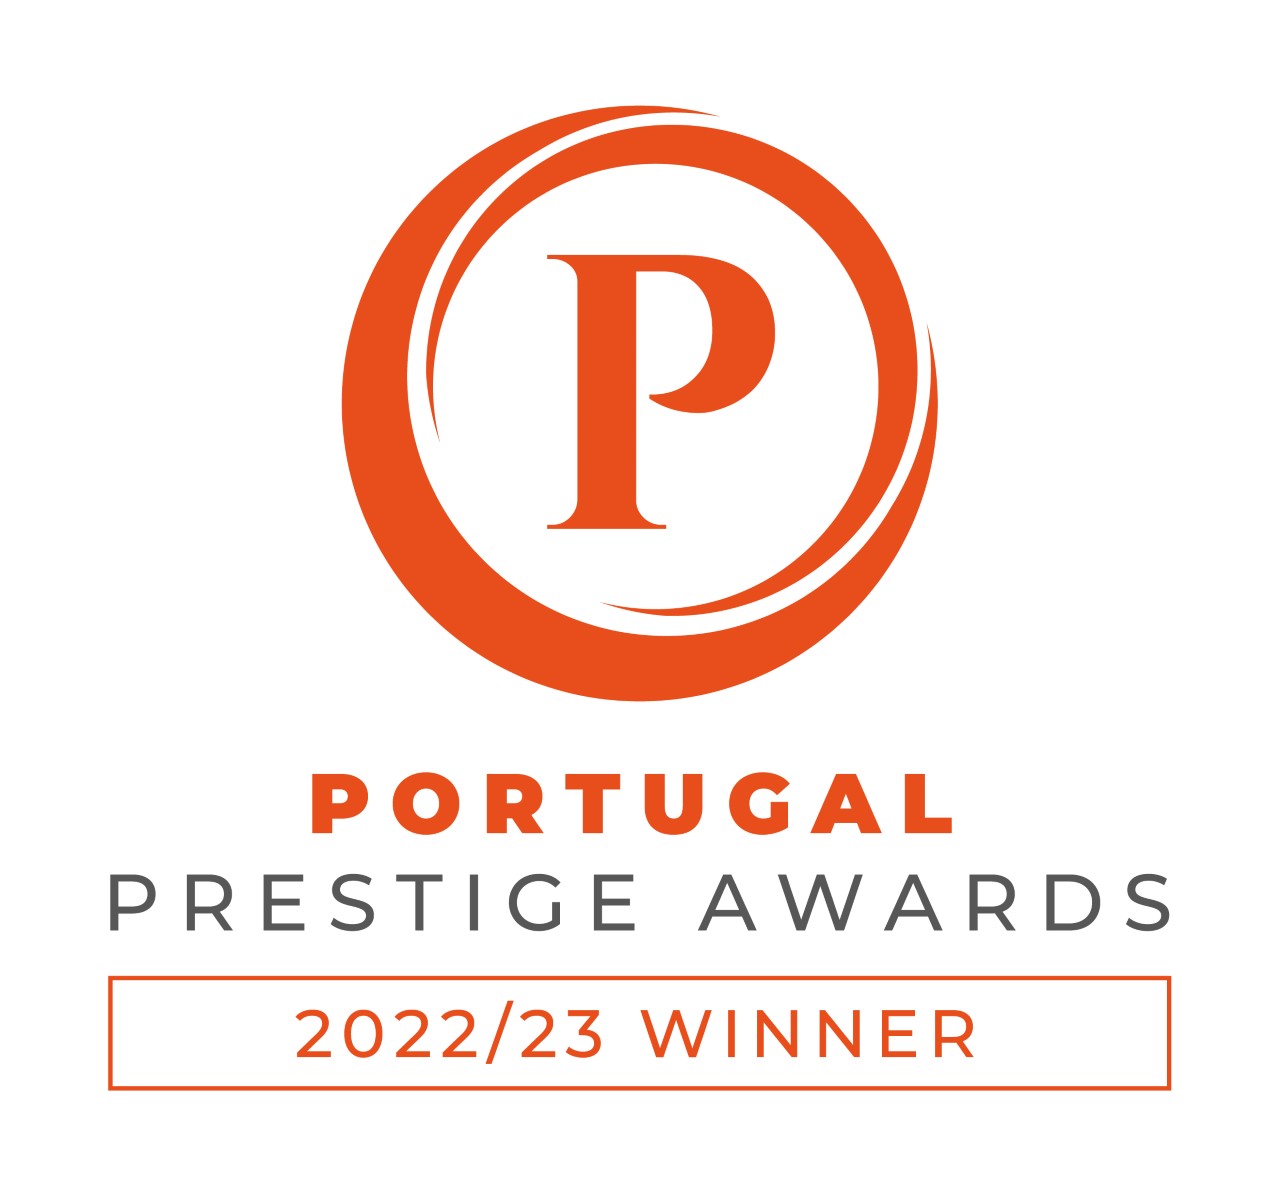 Sharing School was congratulate by Prestige Award as Learning Community of the year 2022/23